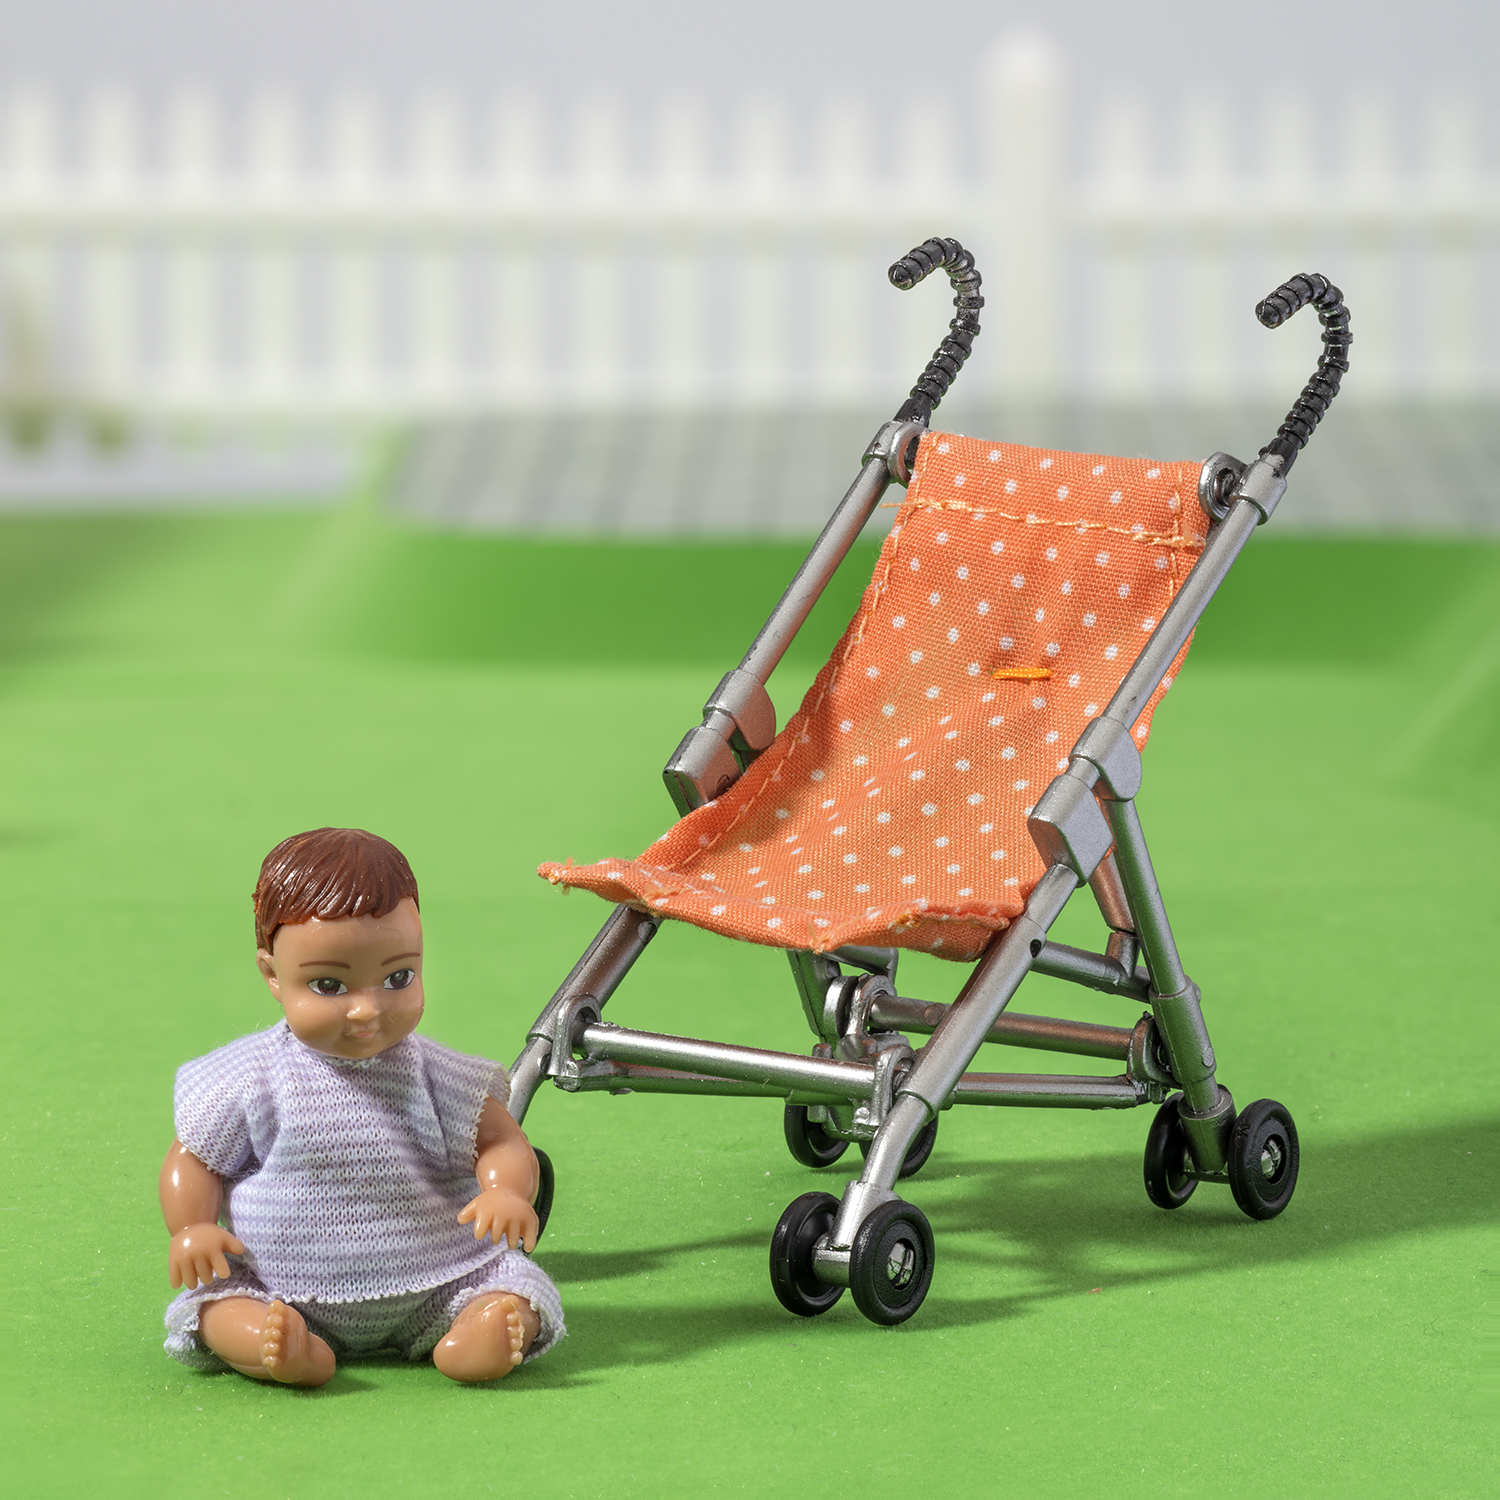 Doll house furniture & doll house accessories lundby dollhouse doll baby & pram